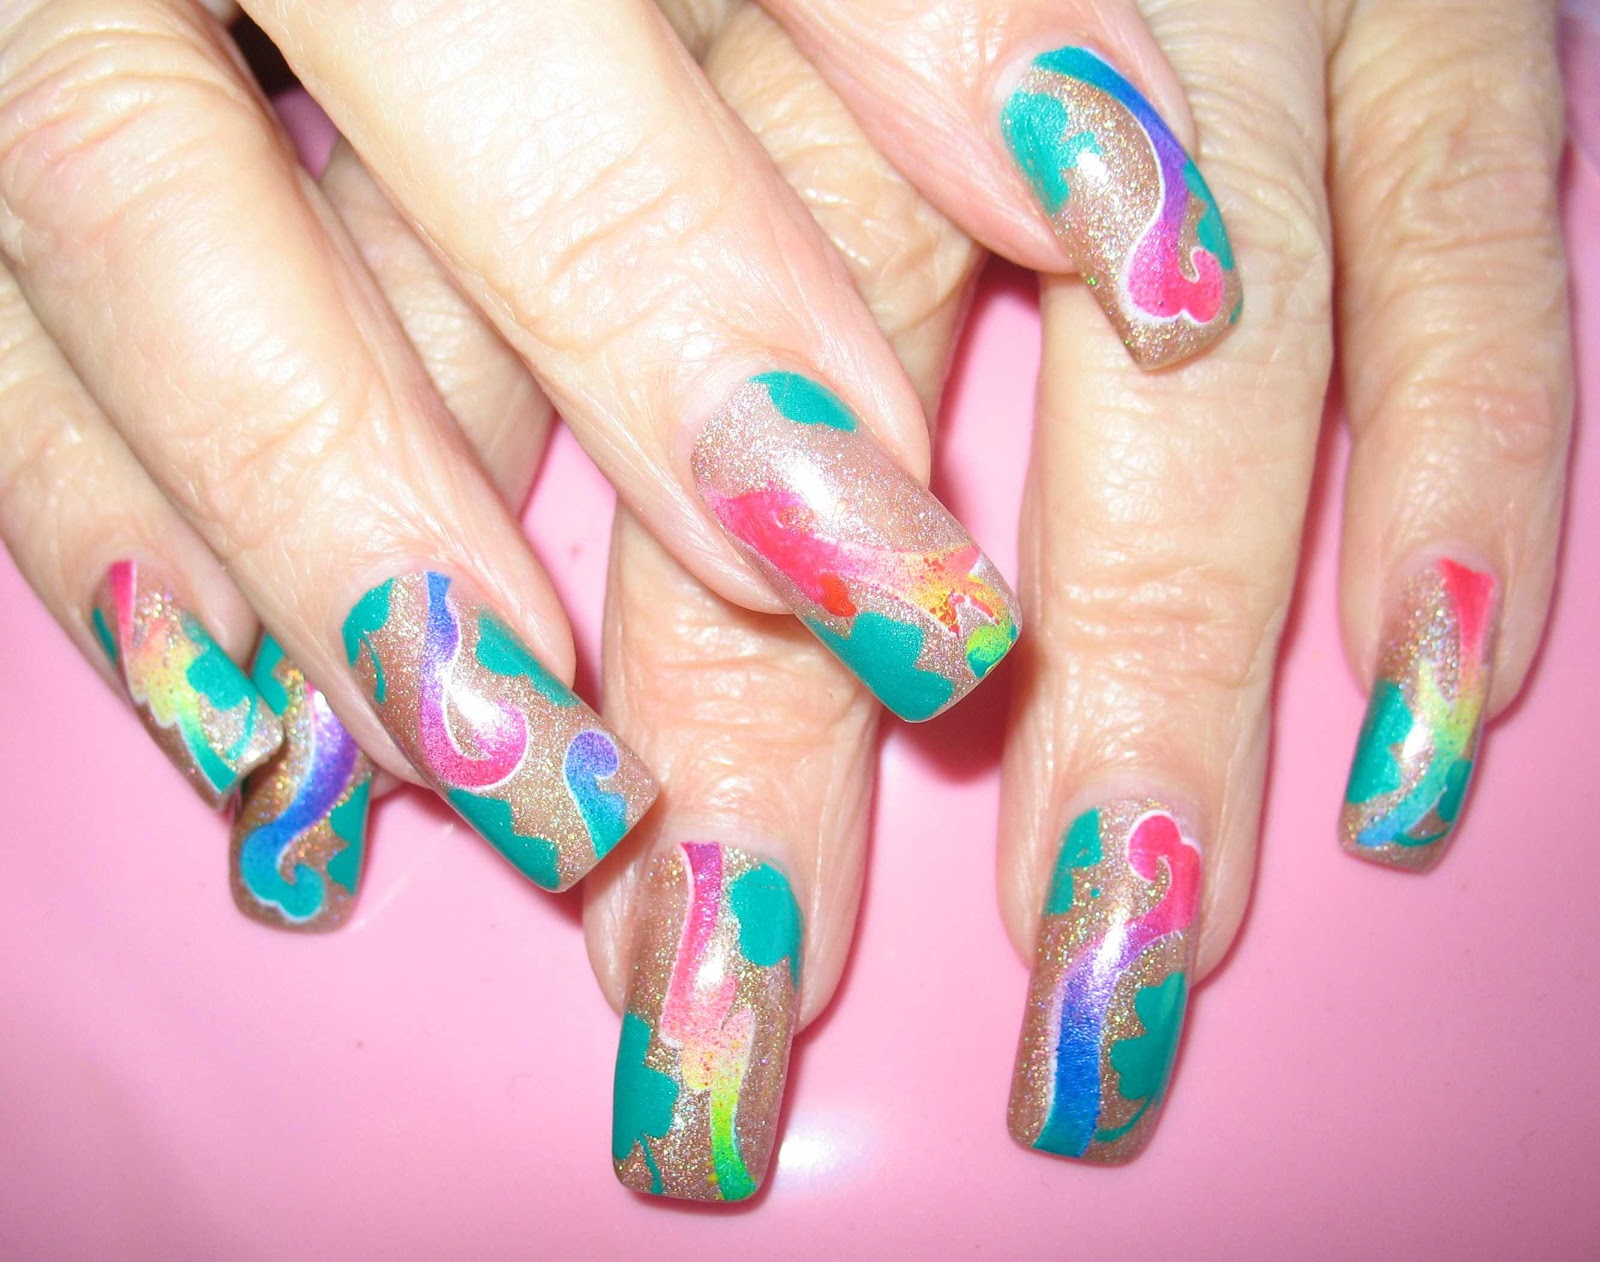 Airbrush Nail Art Images - wide 3